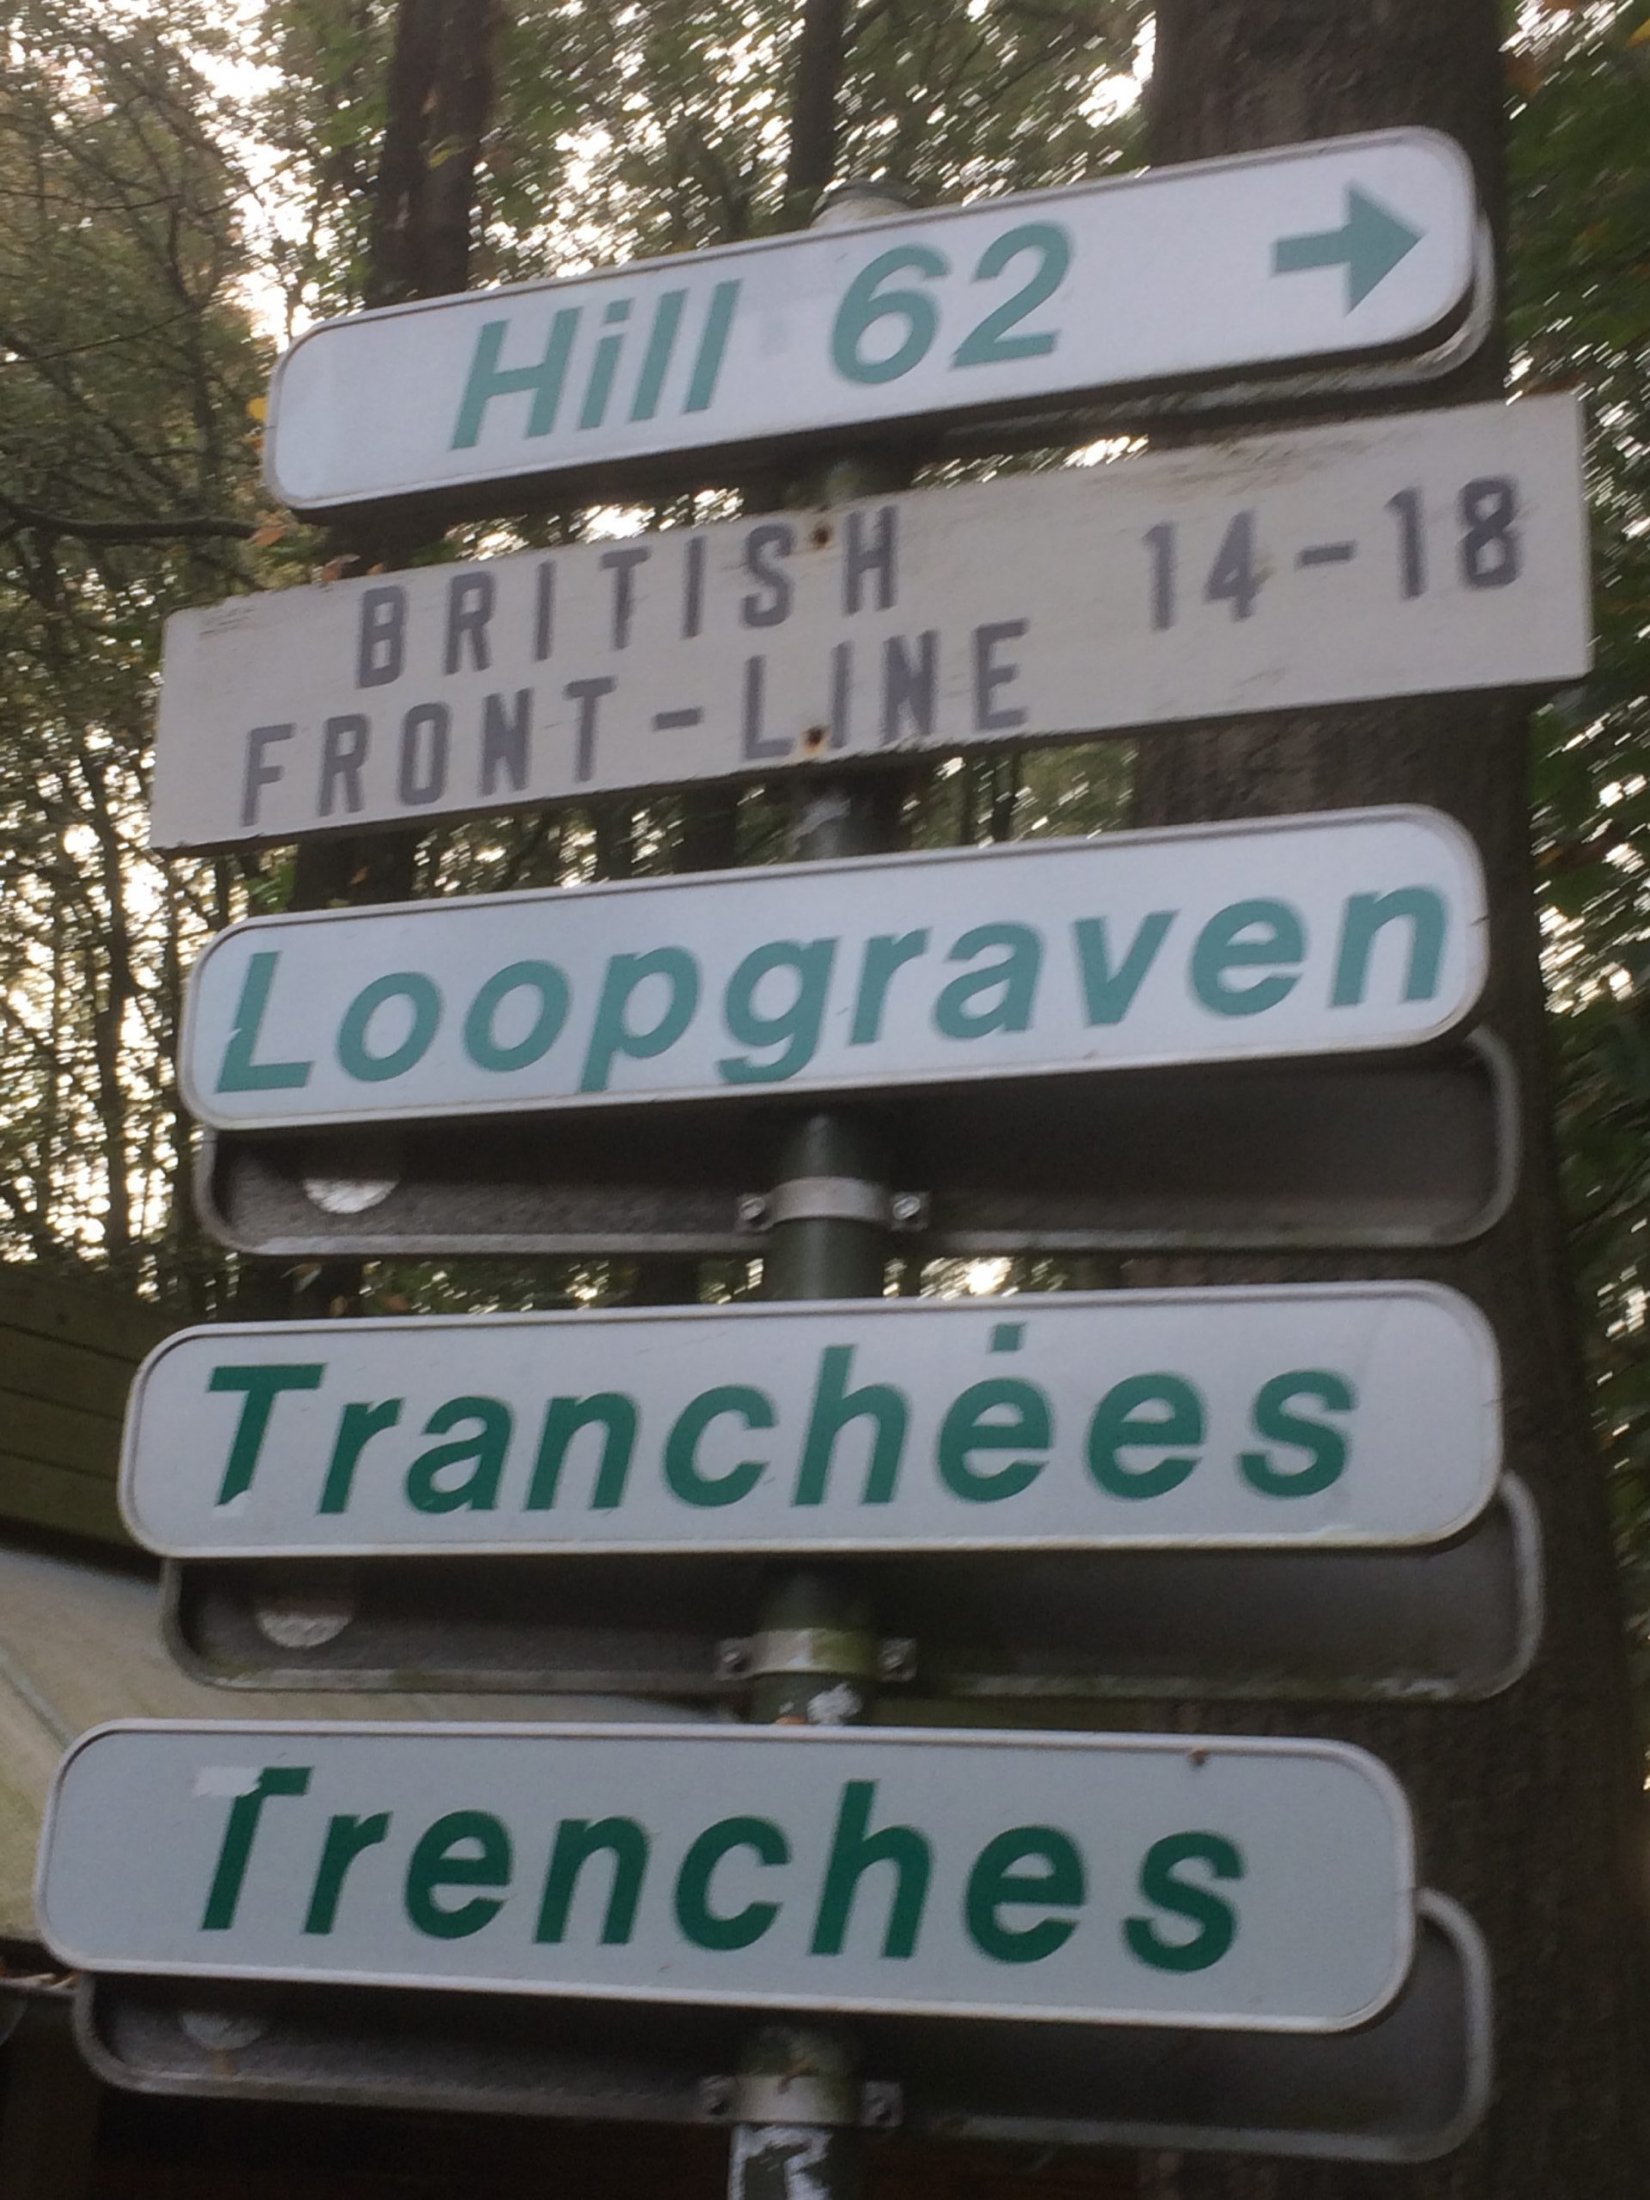 Hill 62 Sign